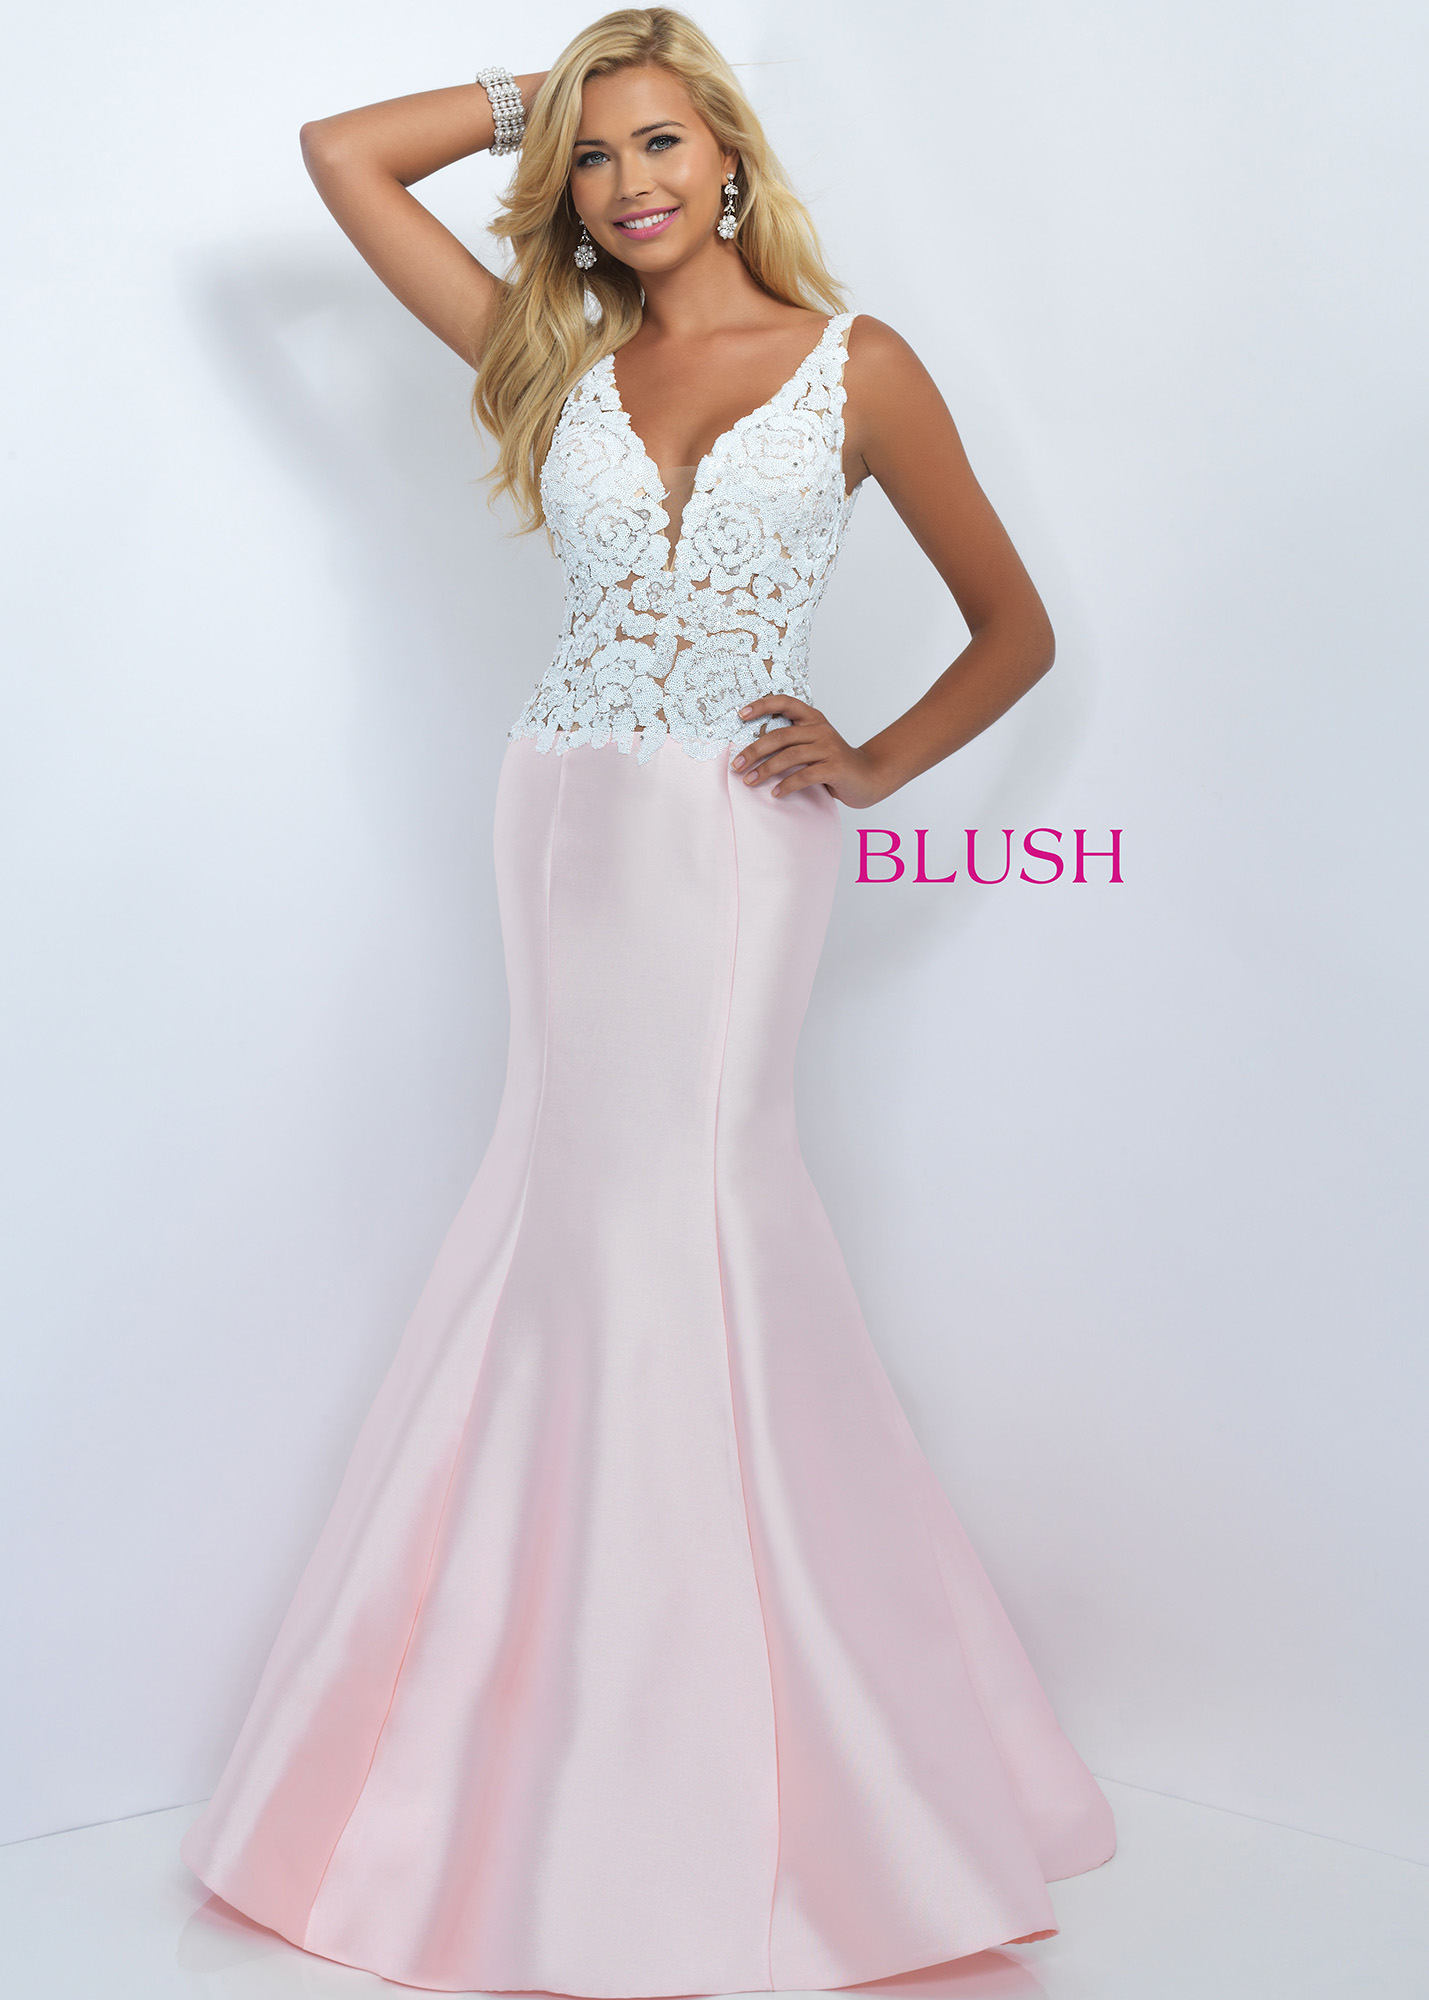 Blush Bridesmaid Dresses Cheap And Fashion Show Collection